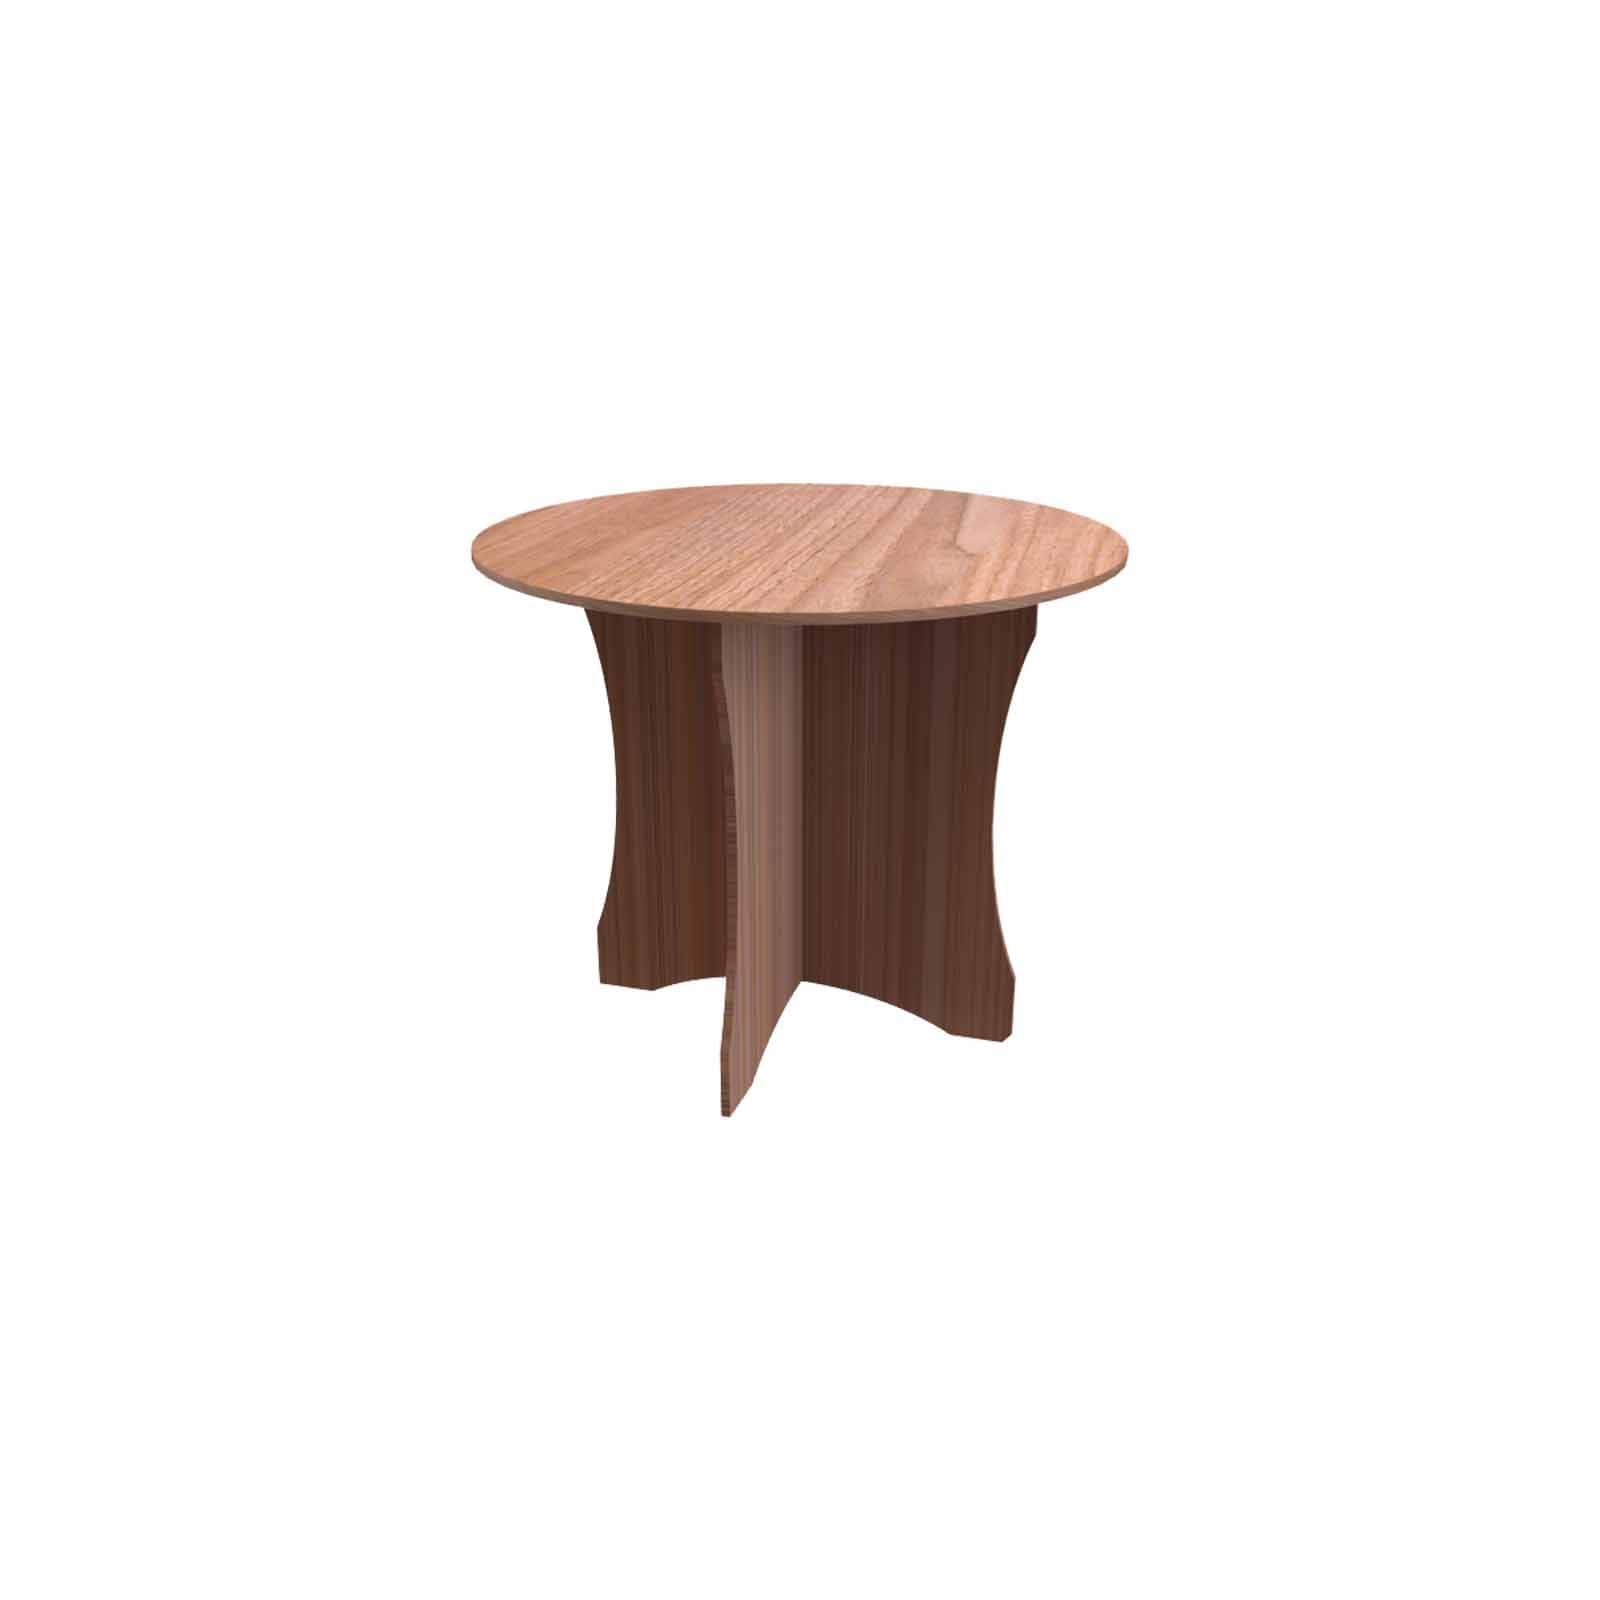 MADE TO ORDER Circular Meeting Table 25mm Top Dia 1000 x H740mm